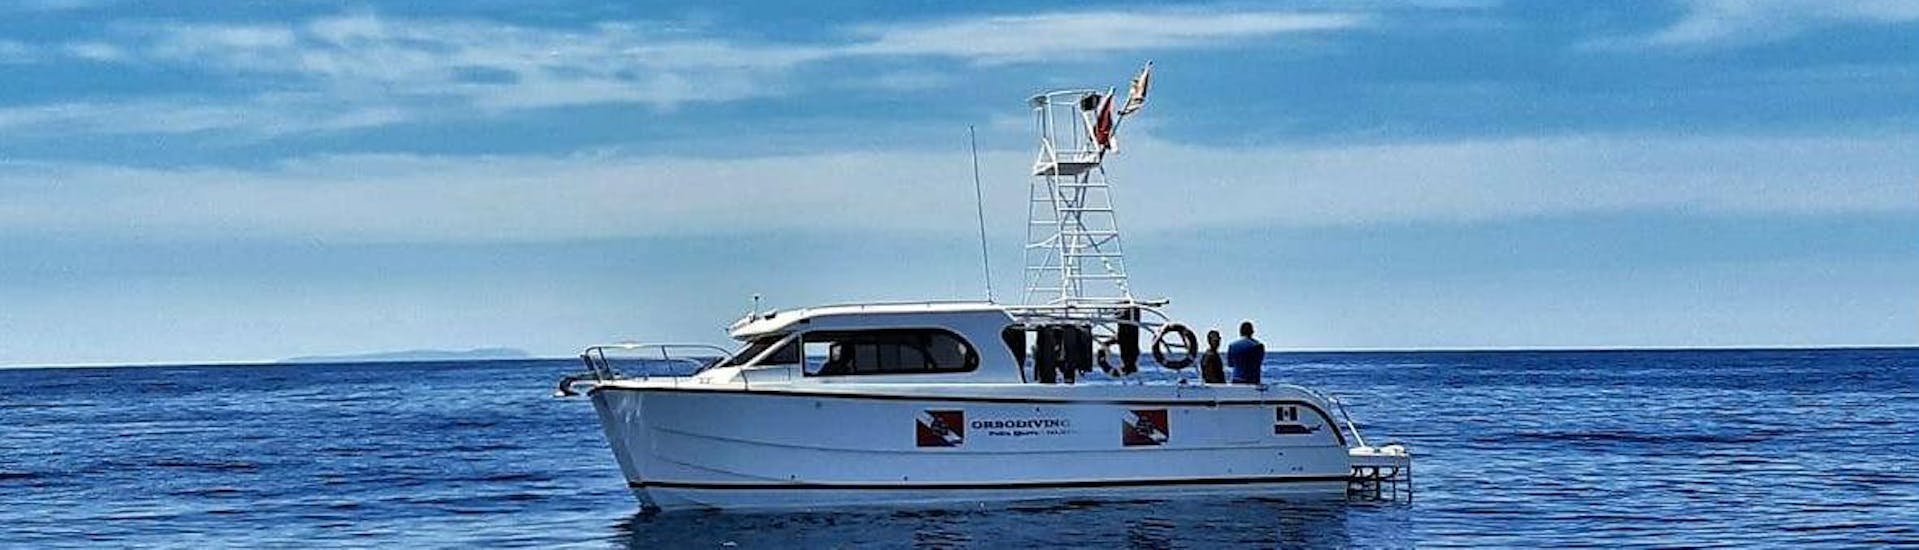 The boat during the boat trip along the Costa Smeralda with Snorkeling Stops hosted by Orso Diving Club Poltu Quatu.